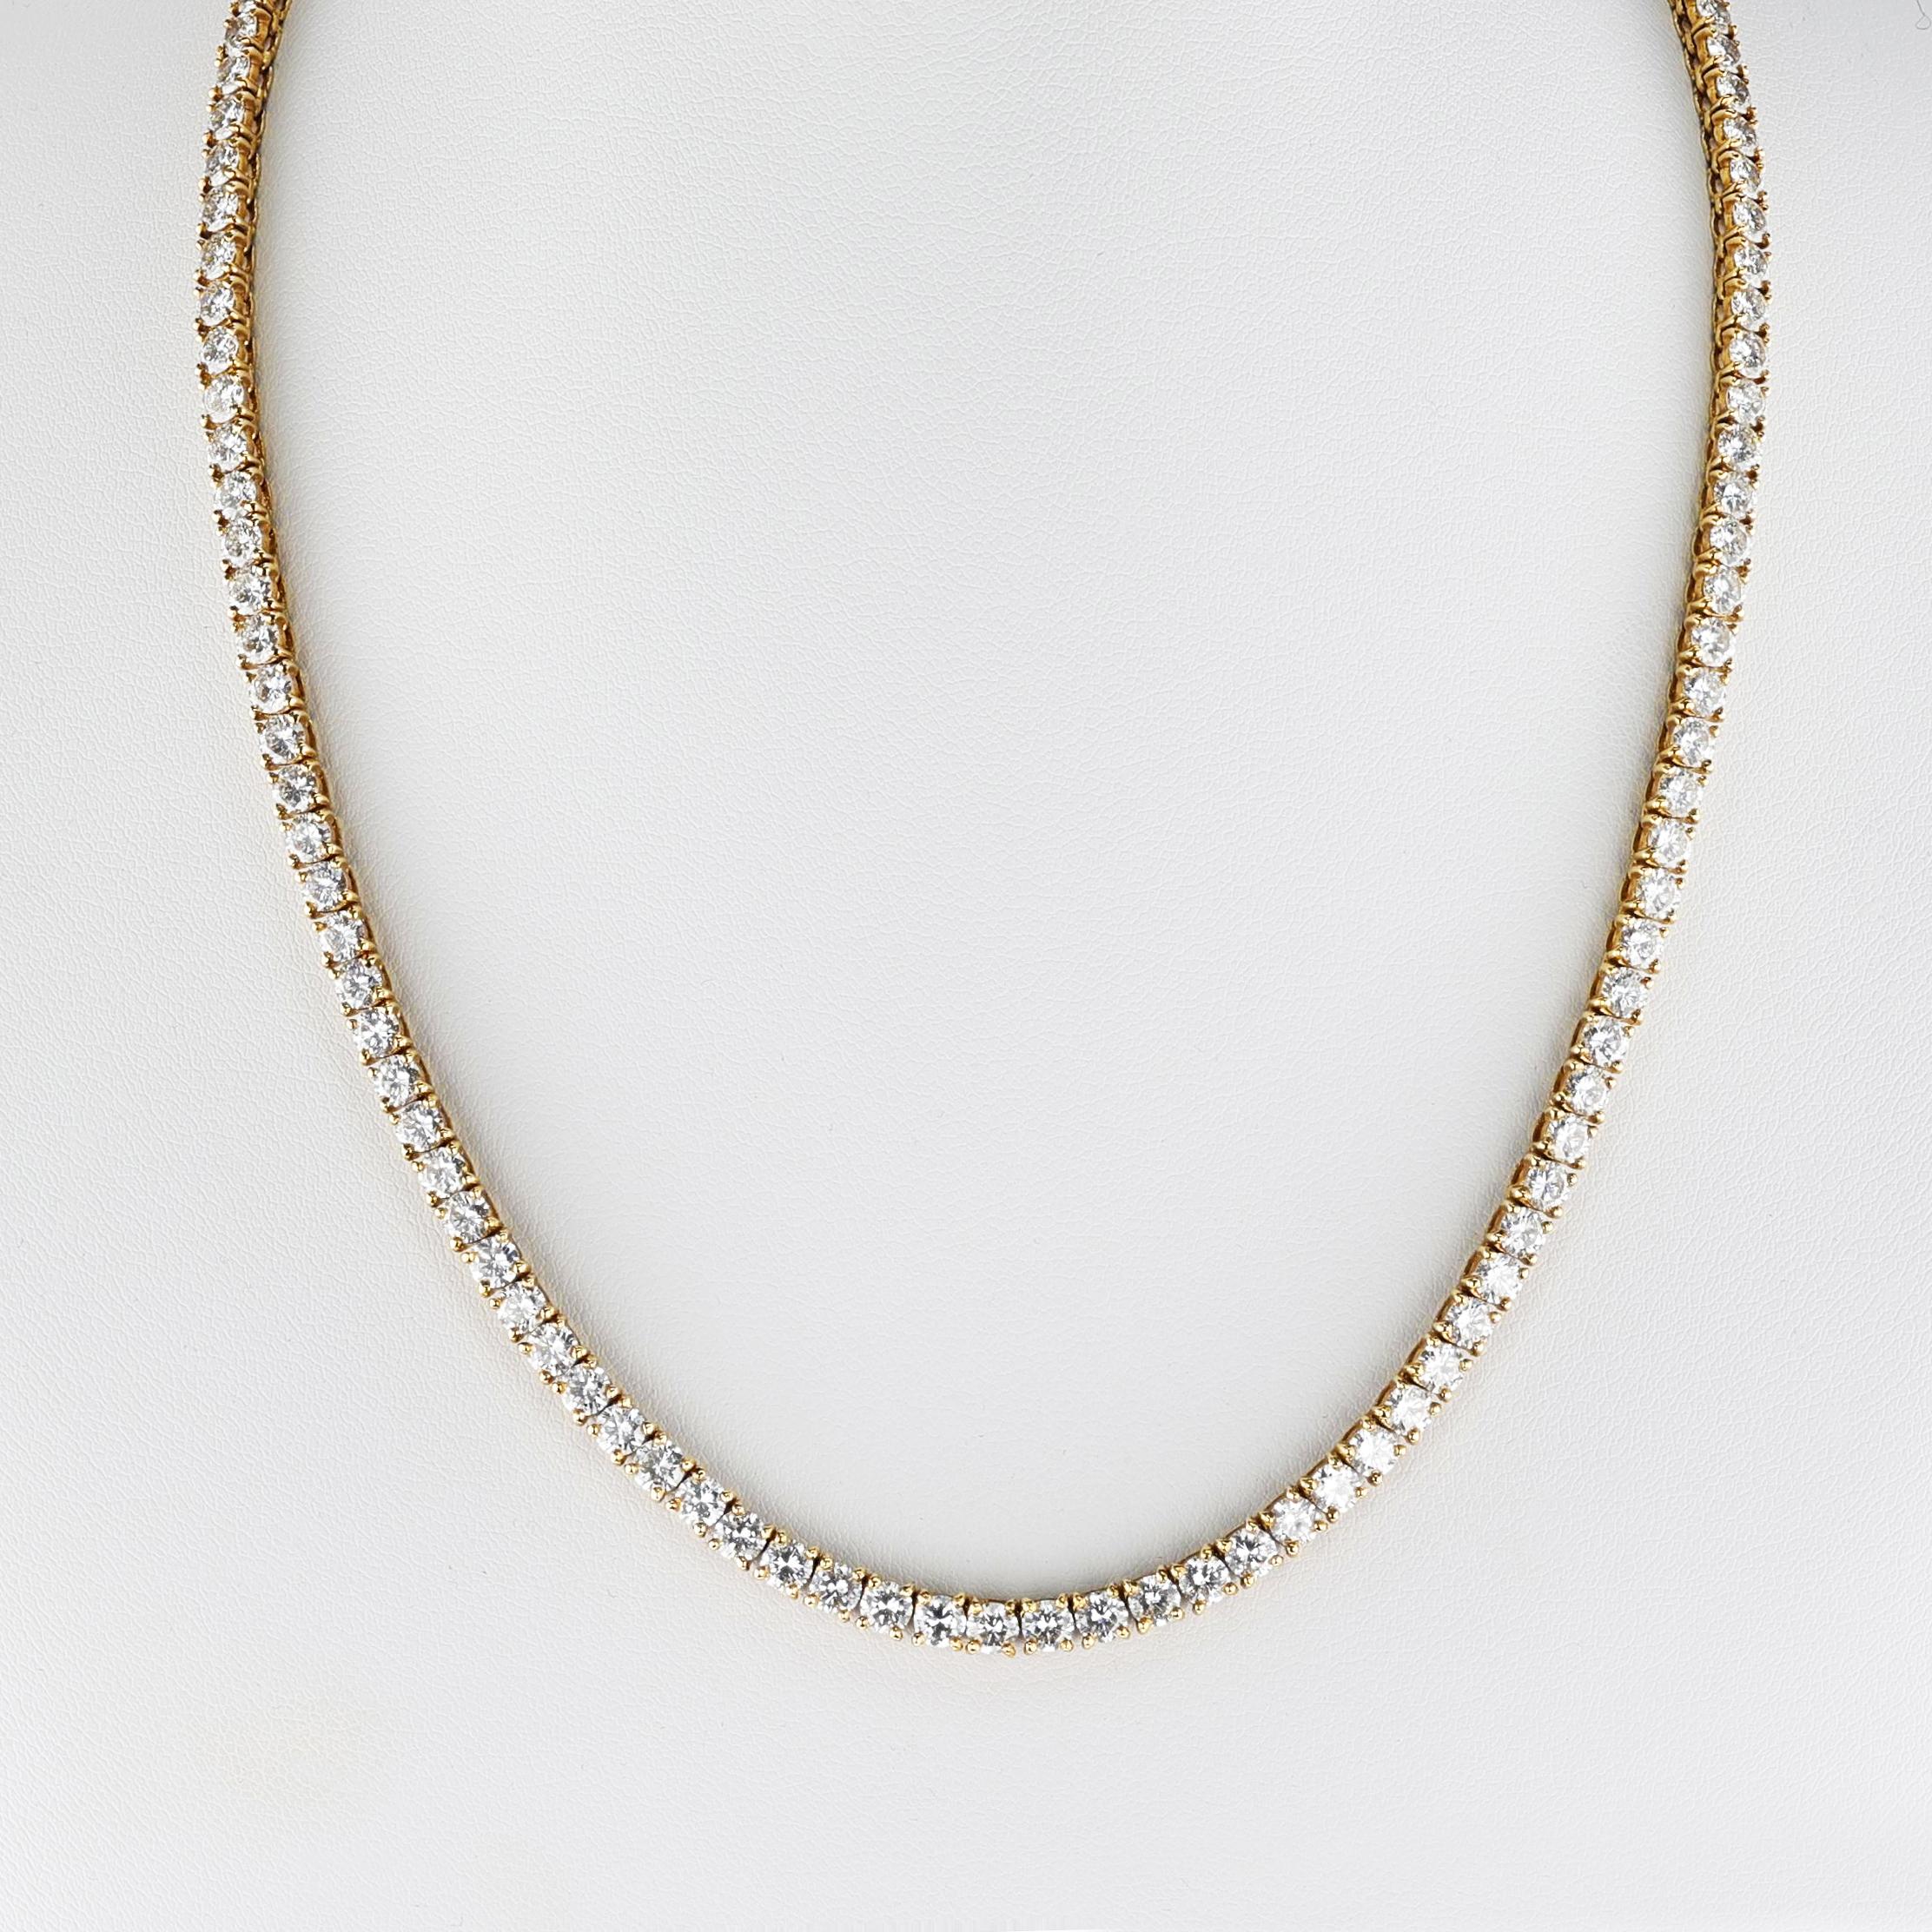 Round Cut Cartier 17 ct.  Diamond Tennis Necklace, 18k Yellow Gold For Sale